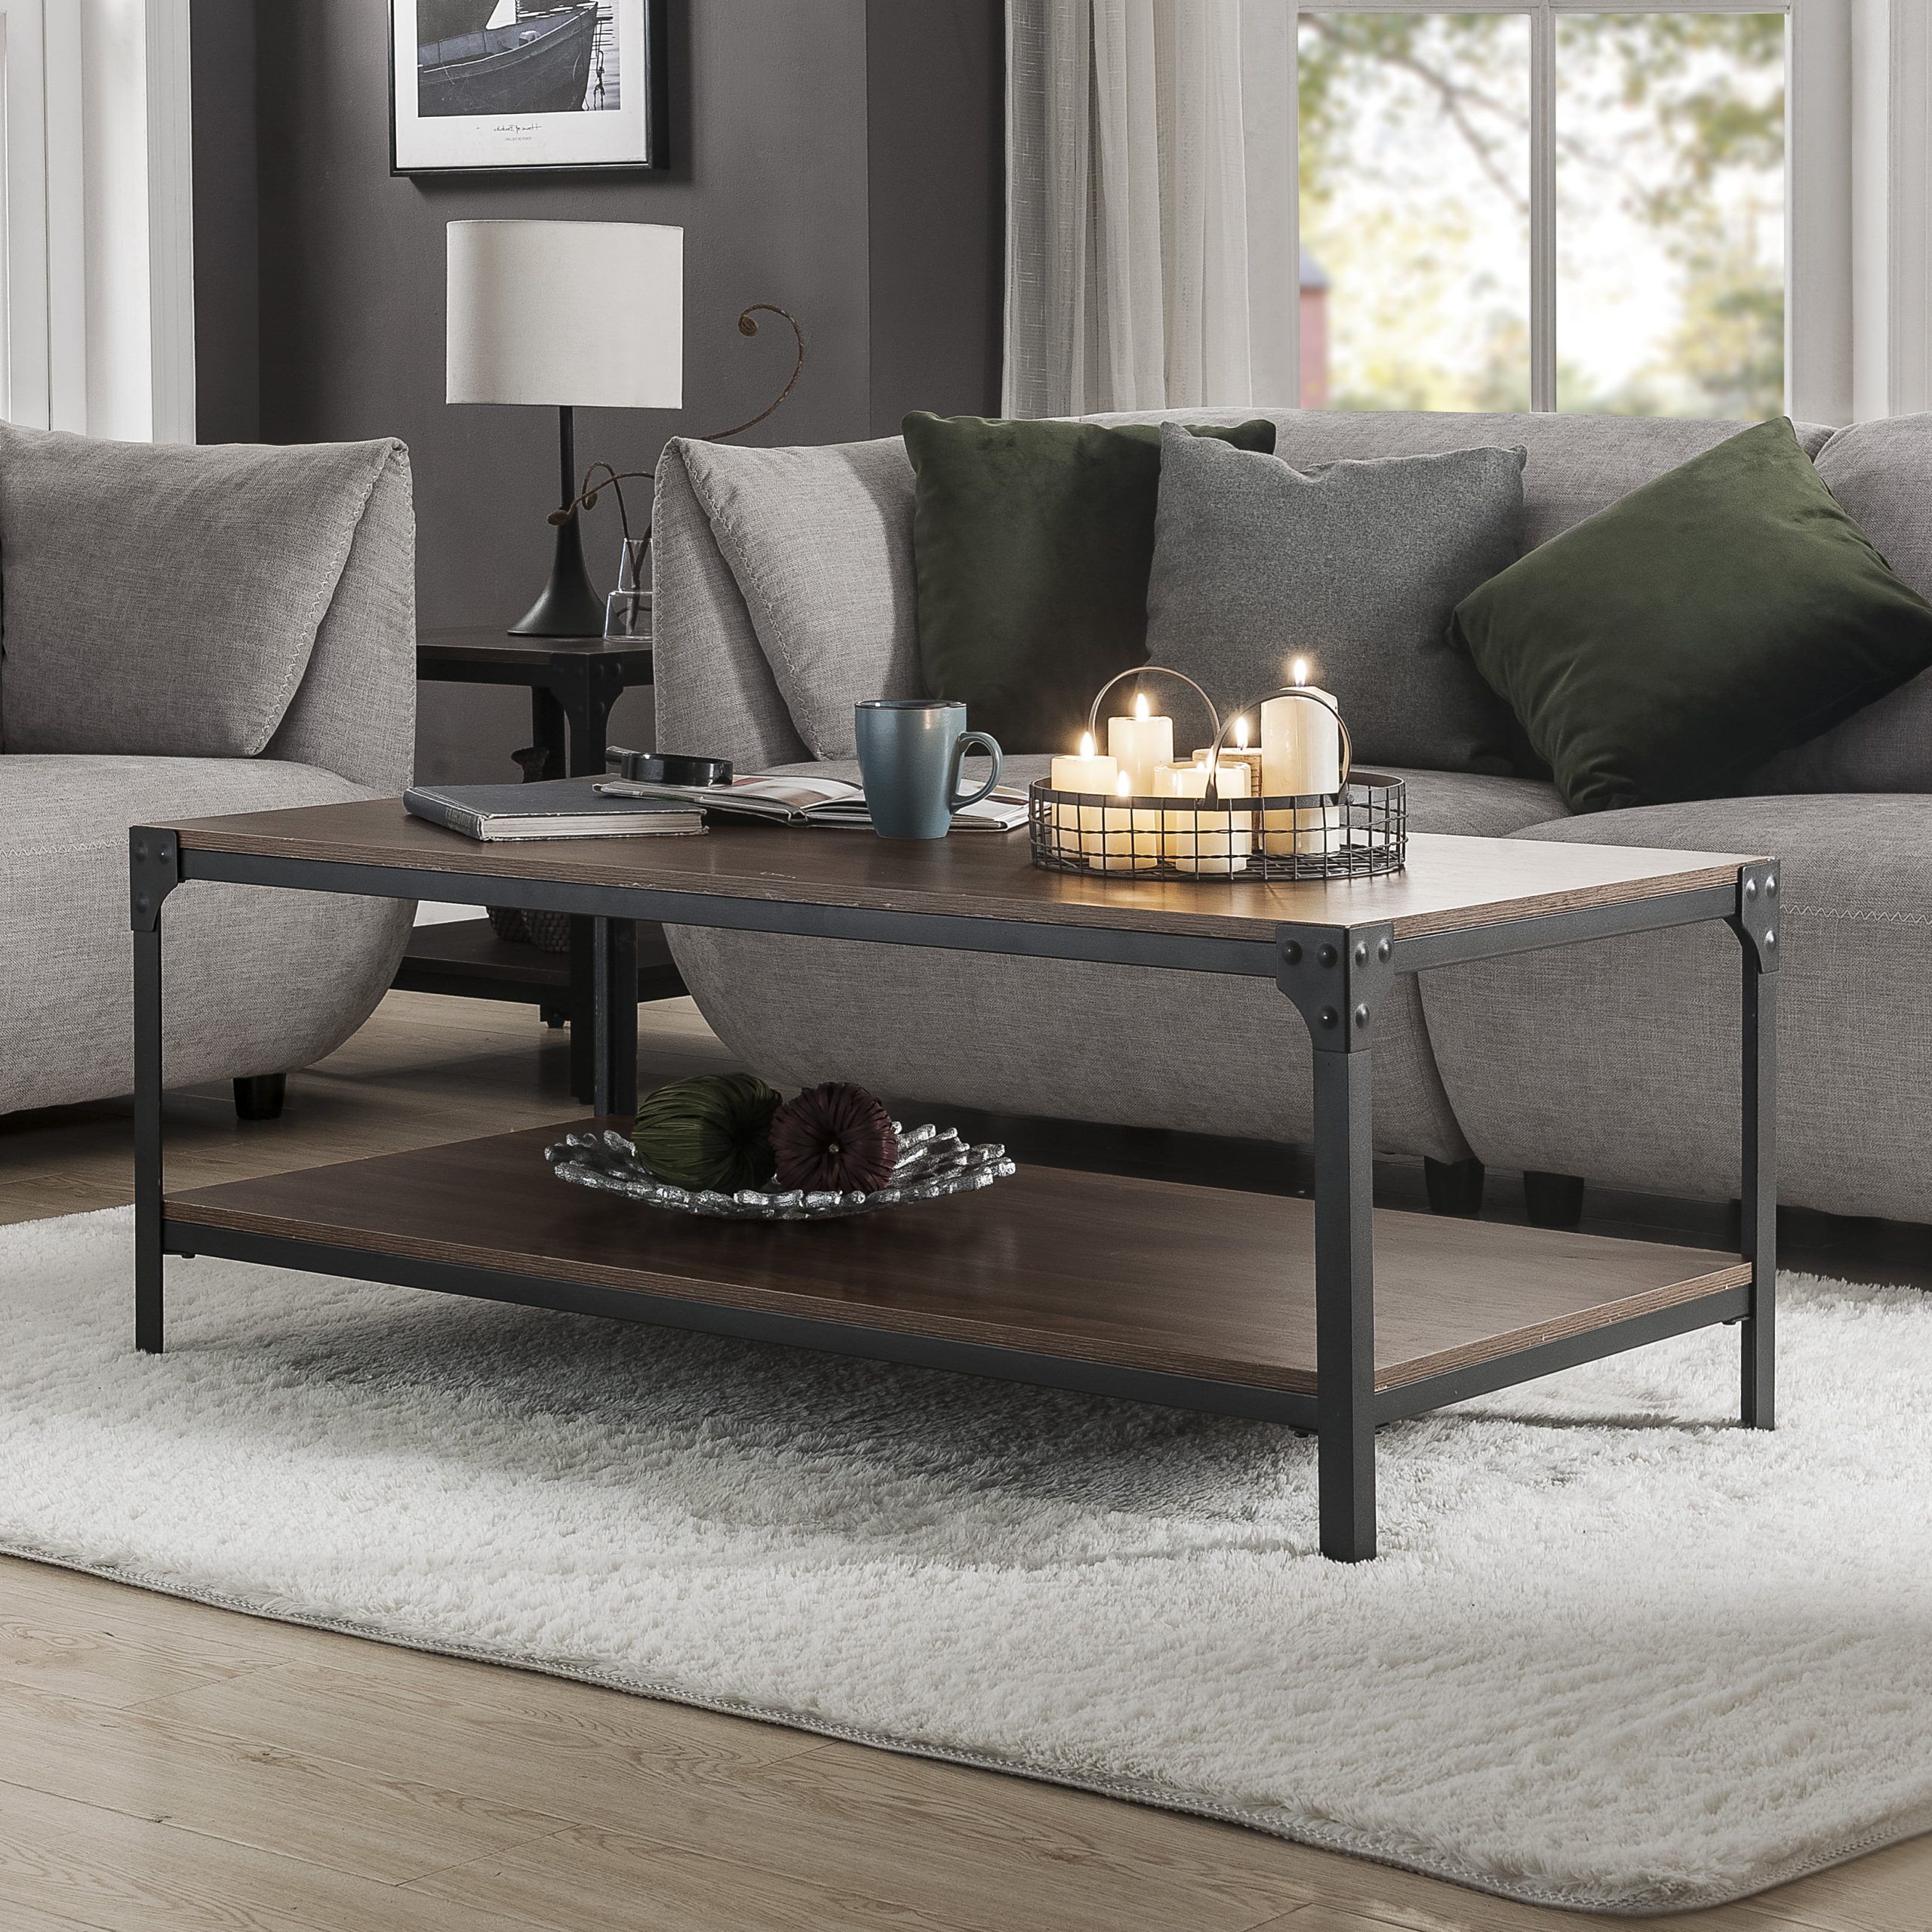 Most Recently Released Metal 1 Shelf Coffee Tables In End Tables For Living Room, Mid Century Rustic Coffee Table With (View 12 of 15)